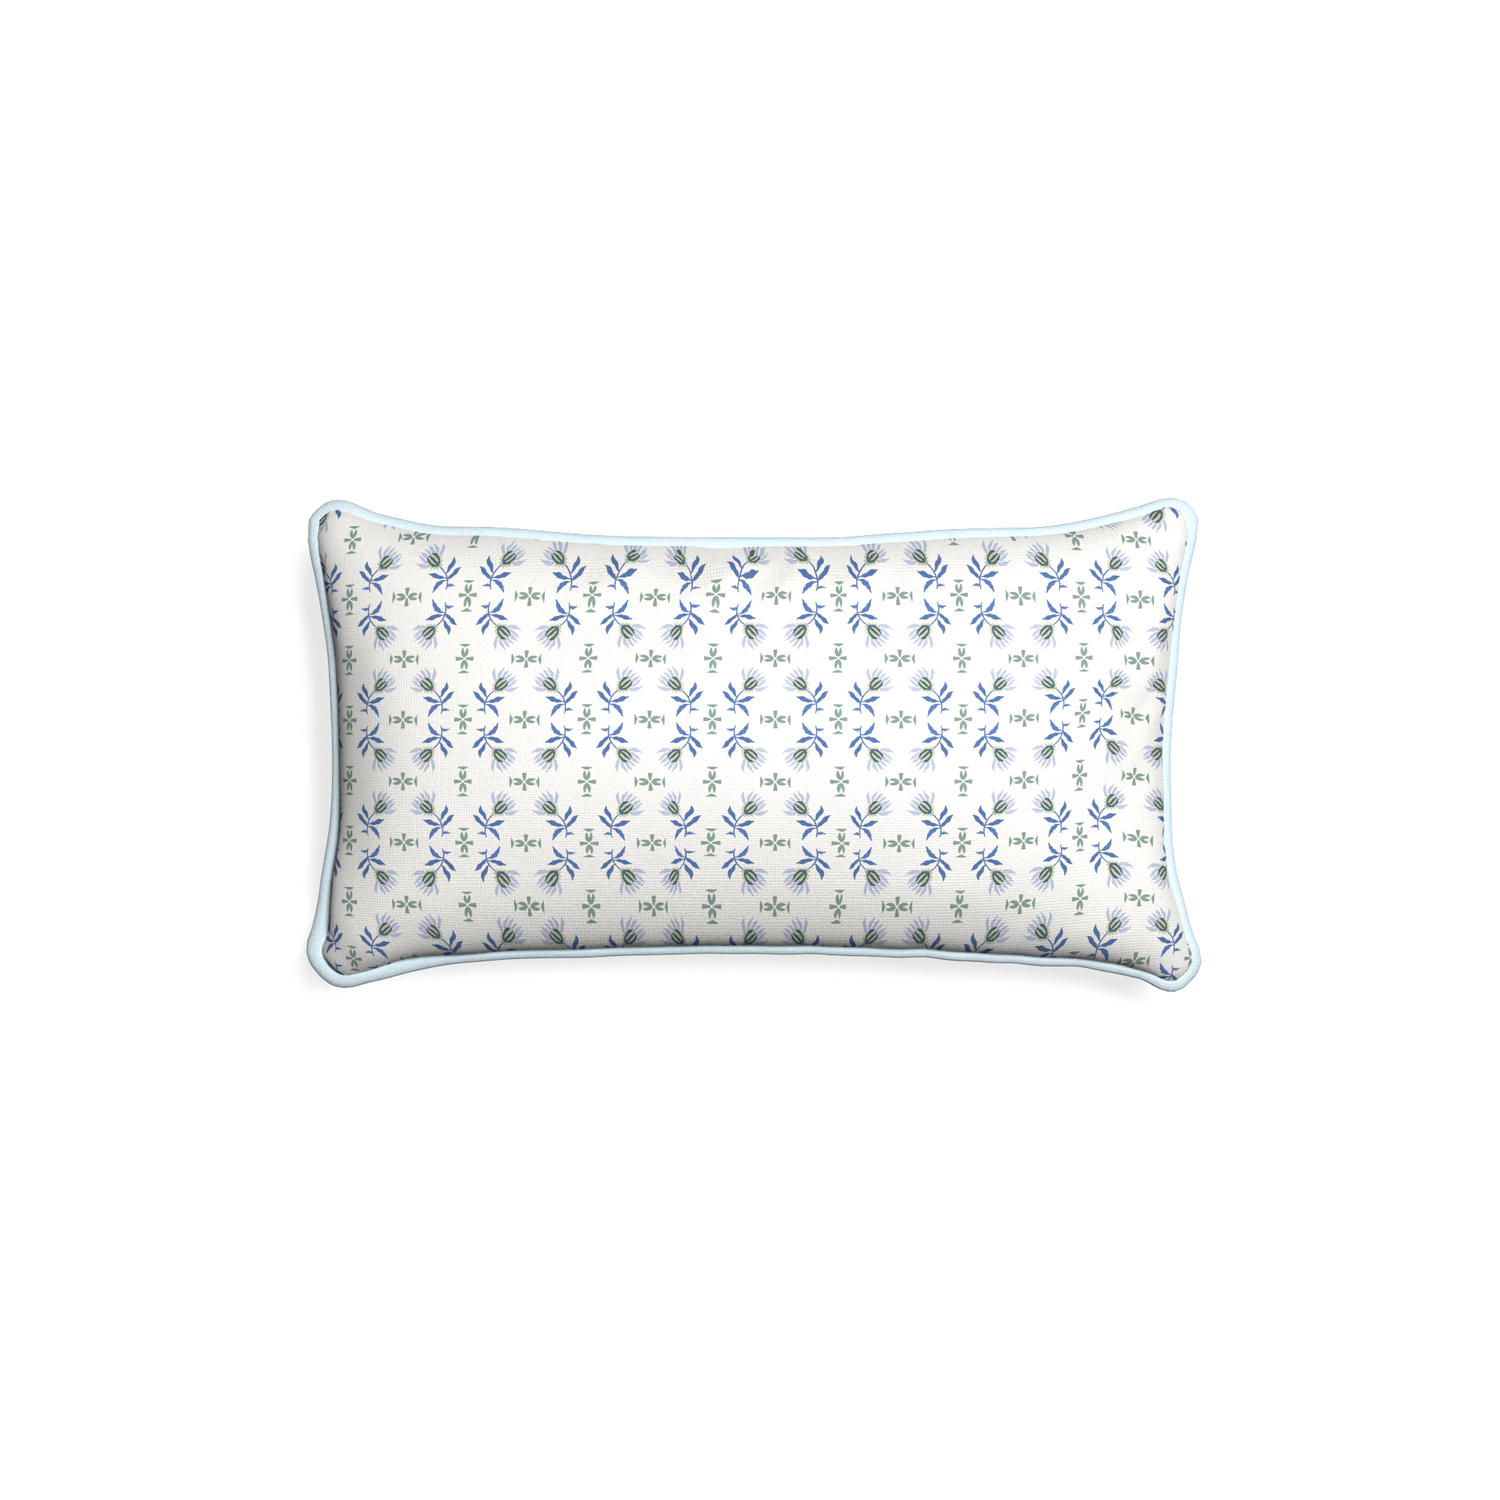 Petite-lumbar lee custom blue & green floralpillow with powder piping on white background